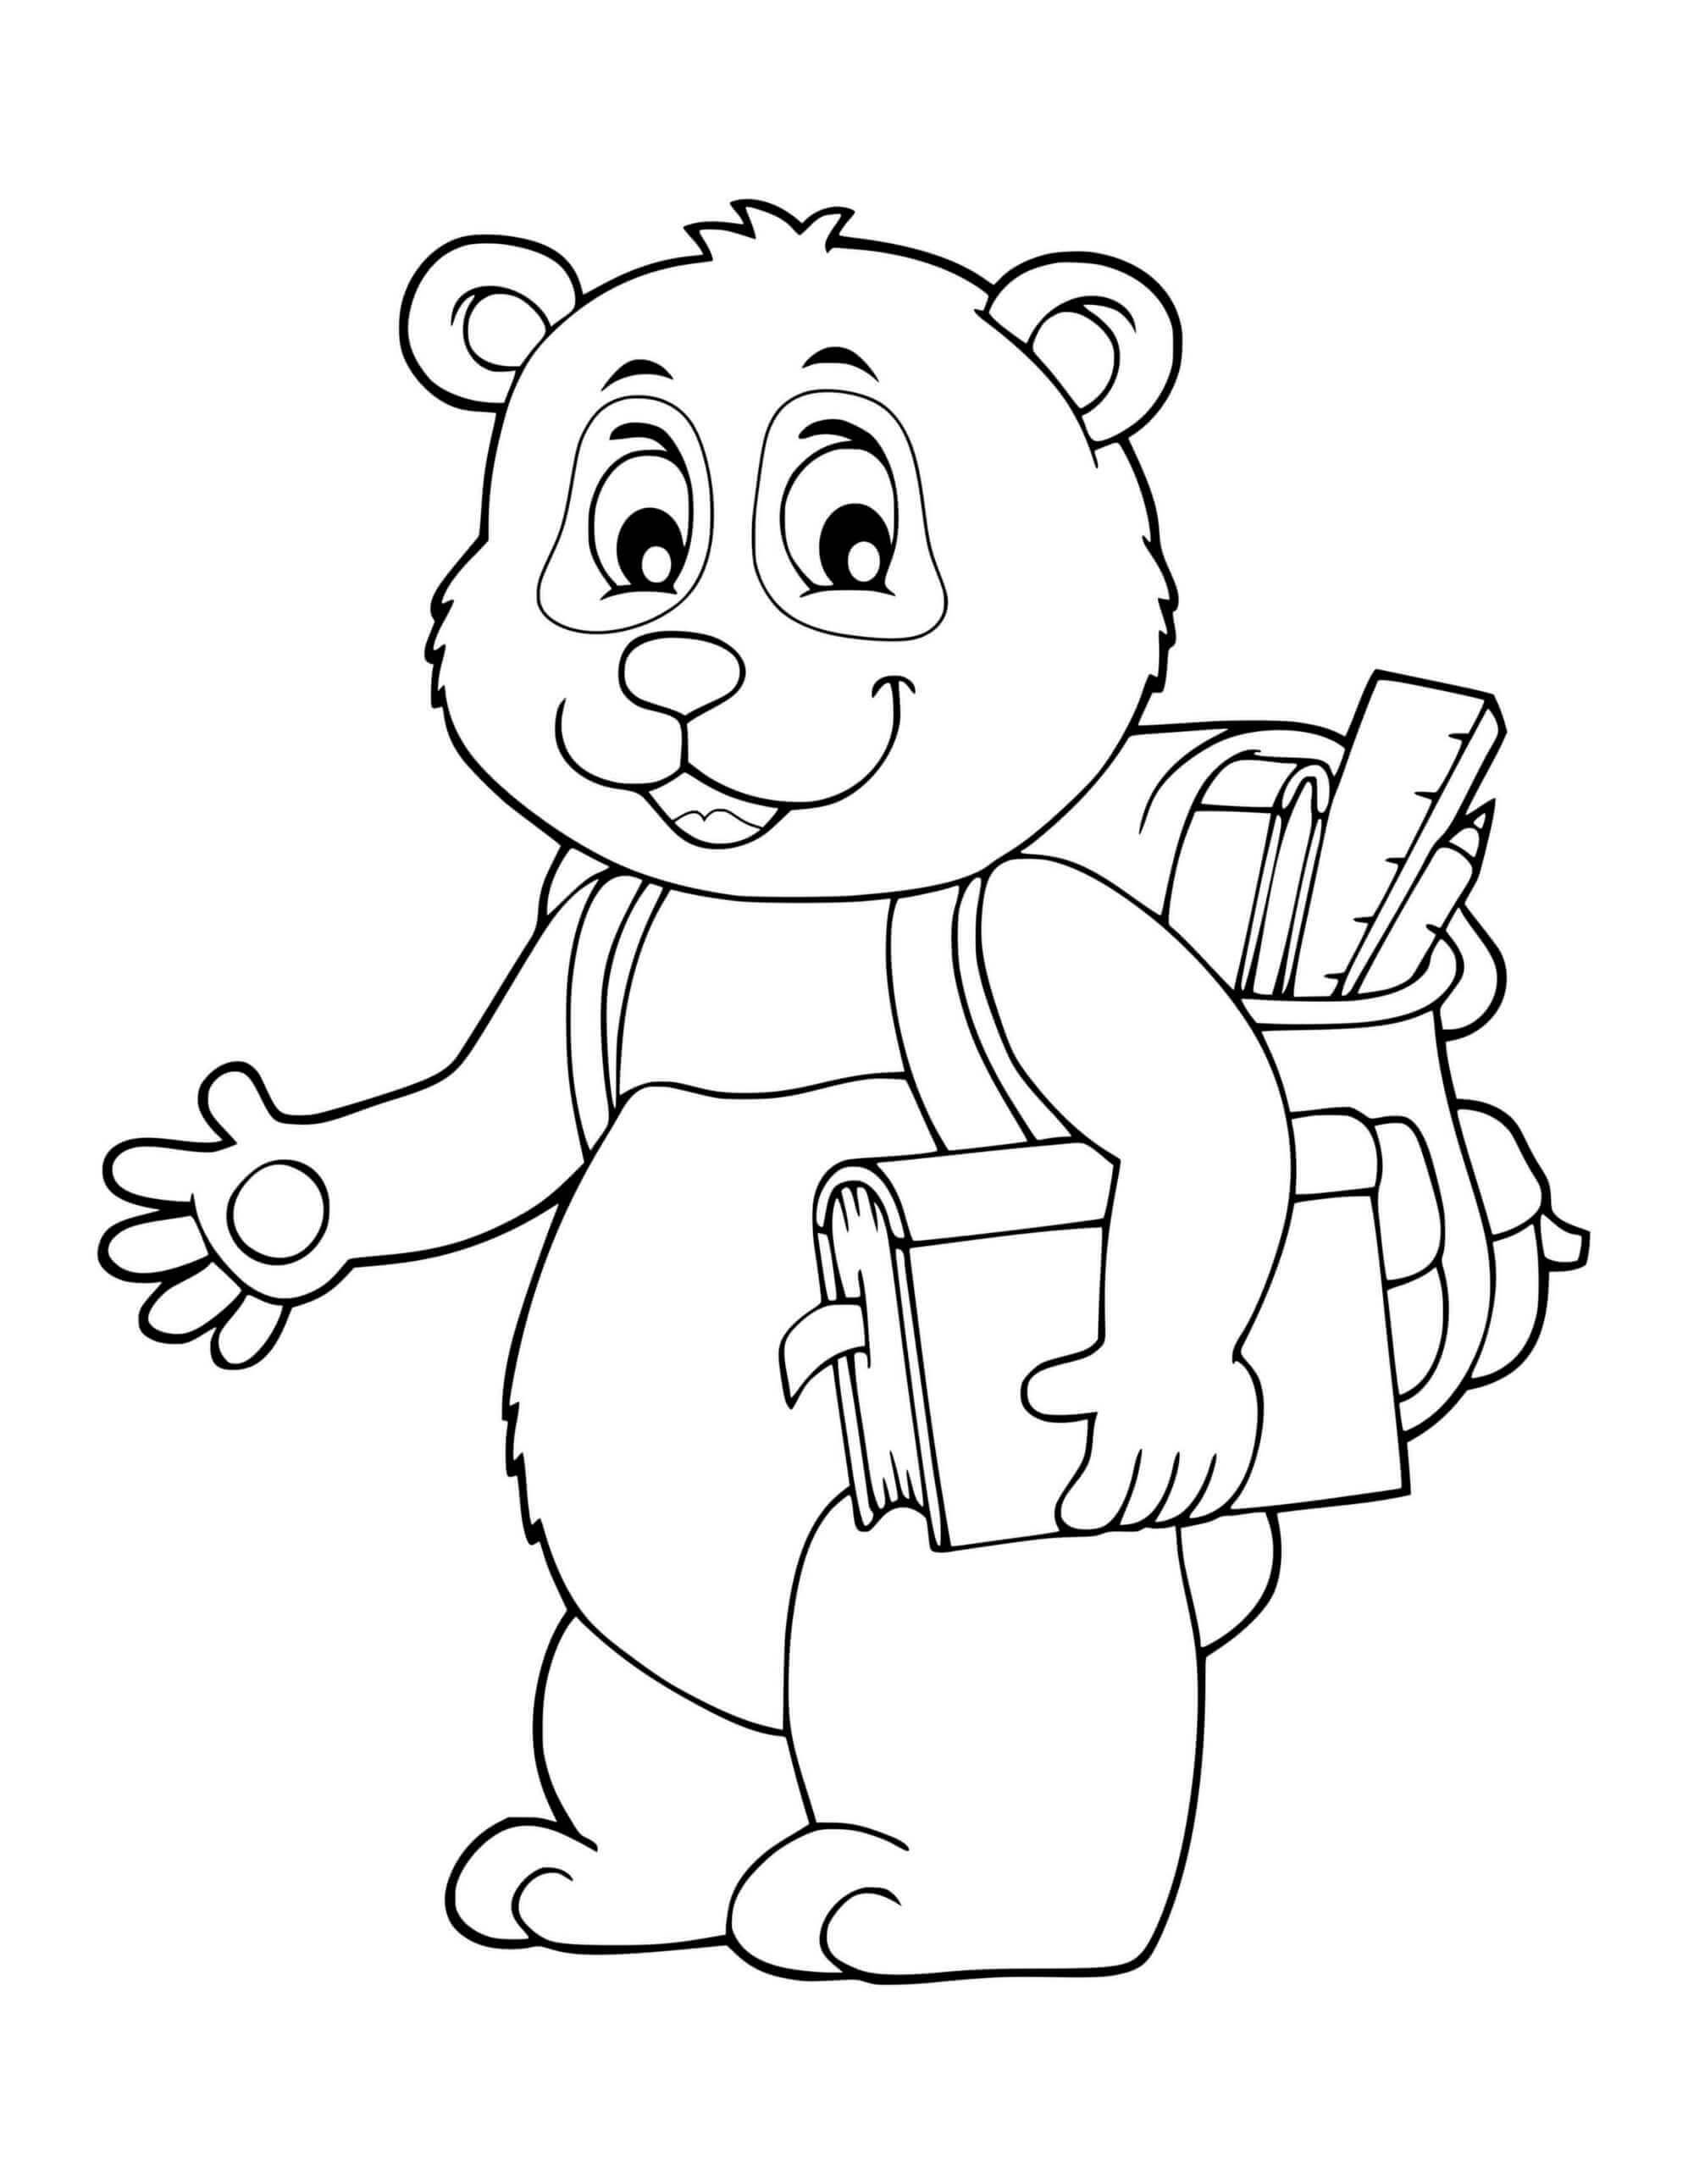 Fall Back To School Cute Bear Coloring Pages - Coloring Cool